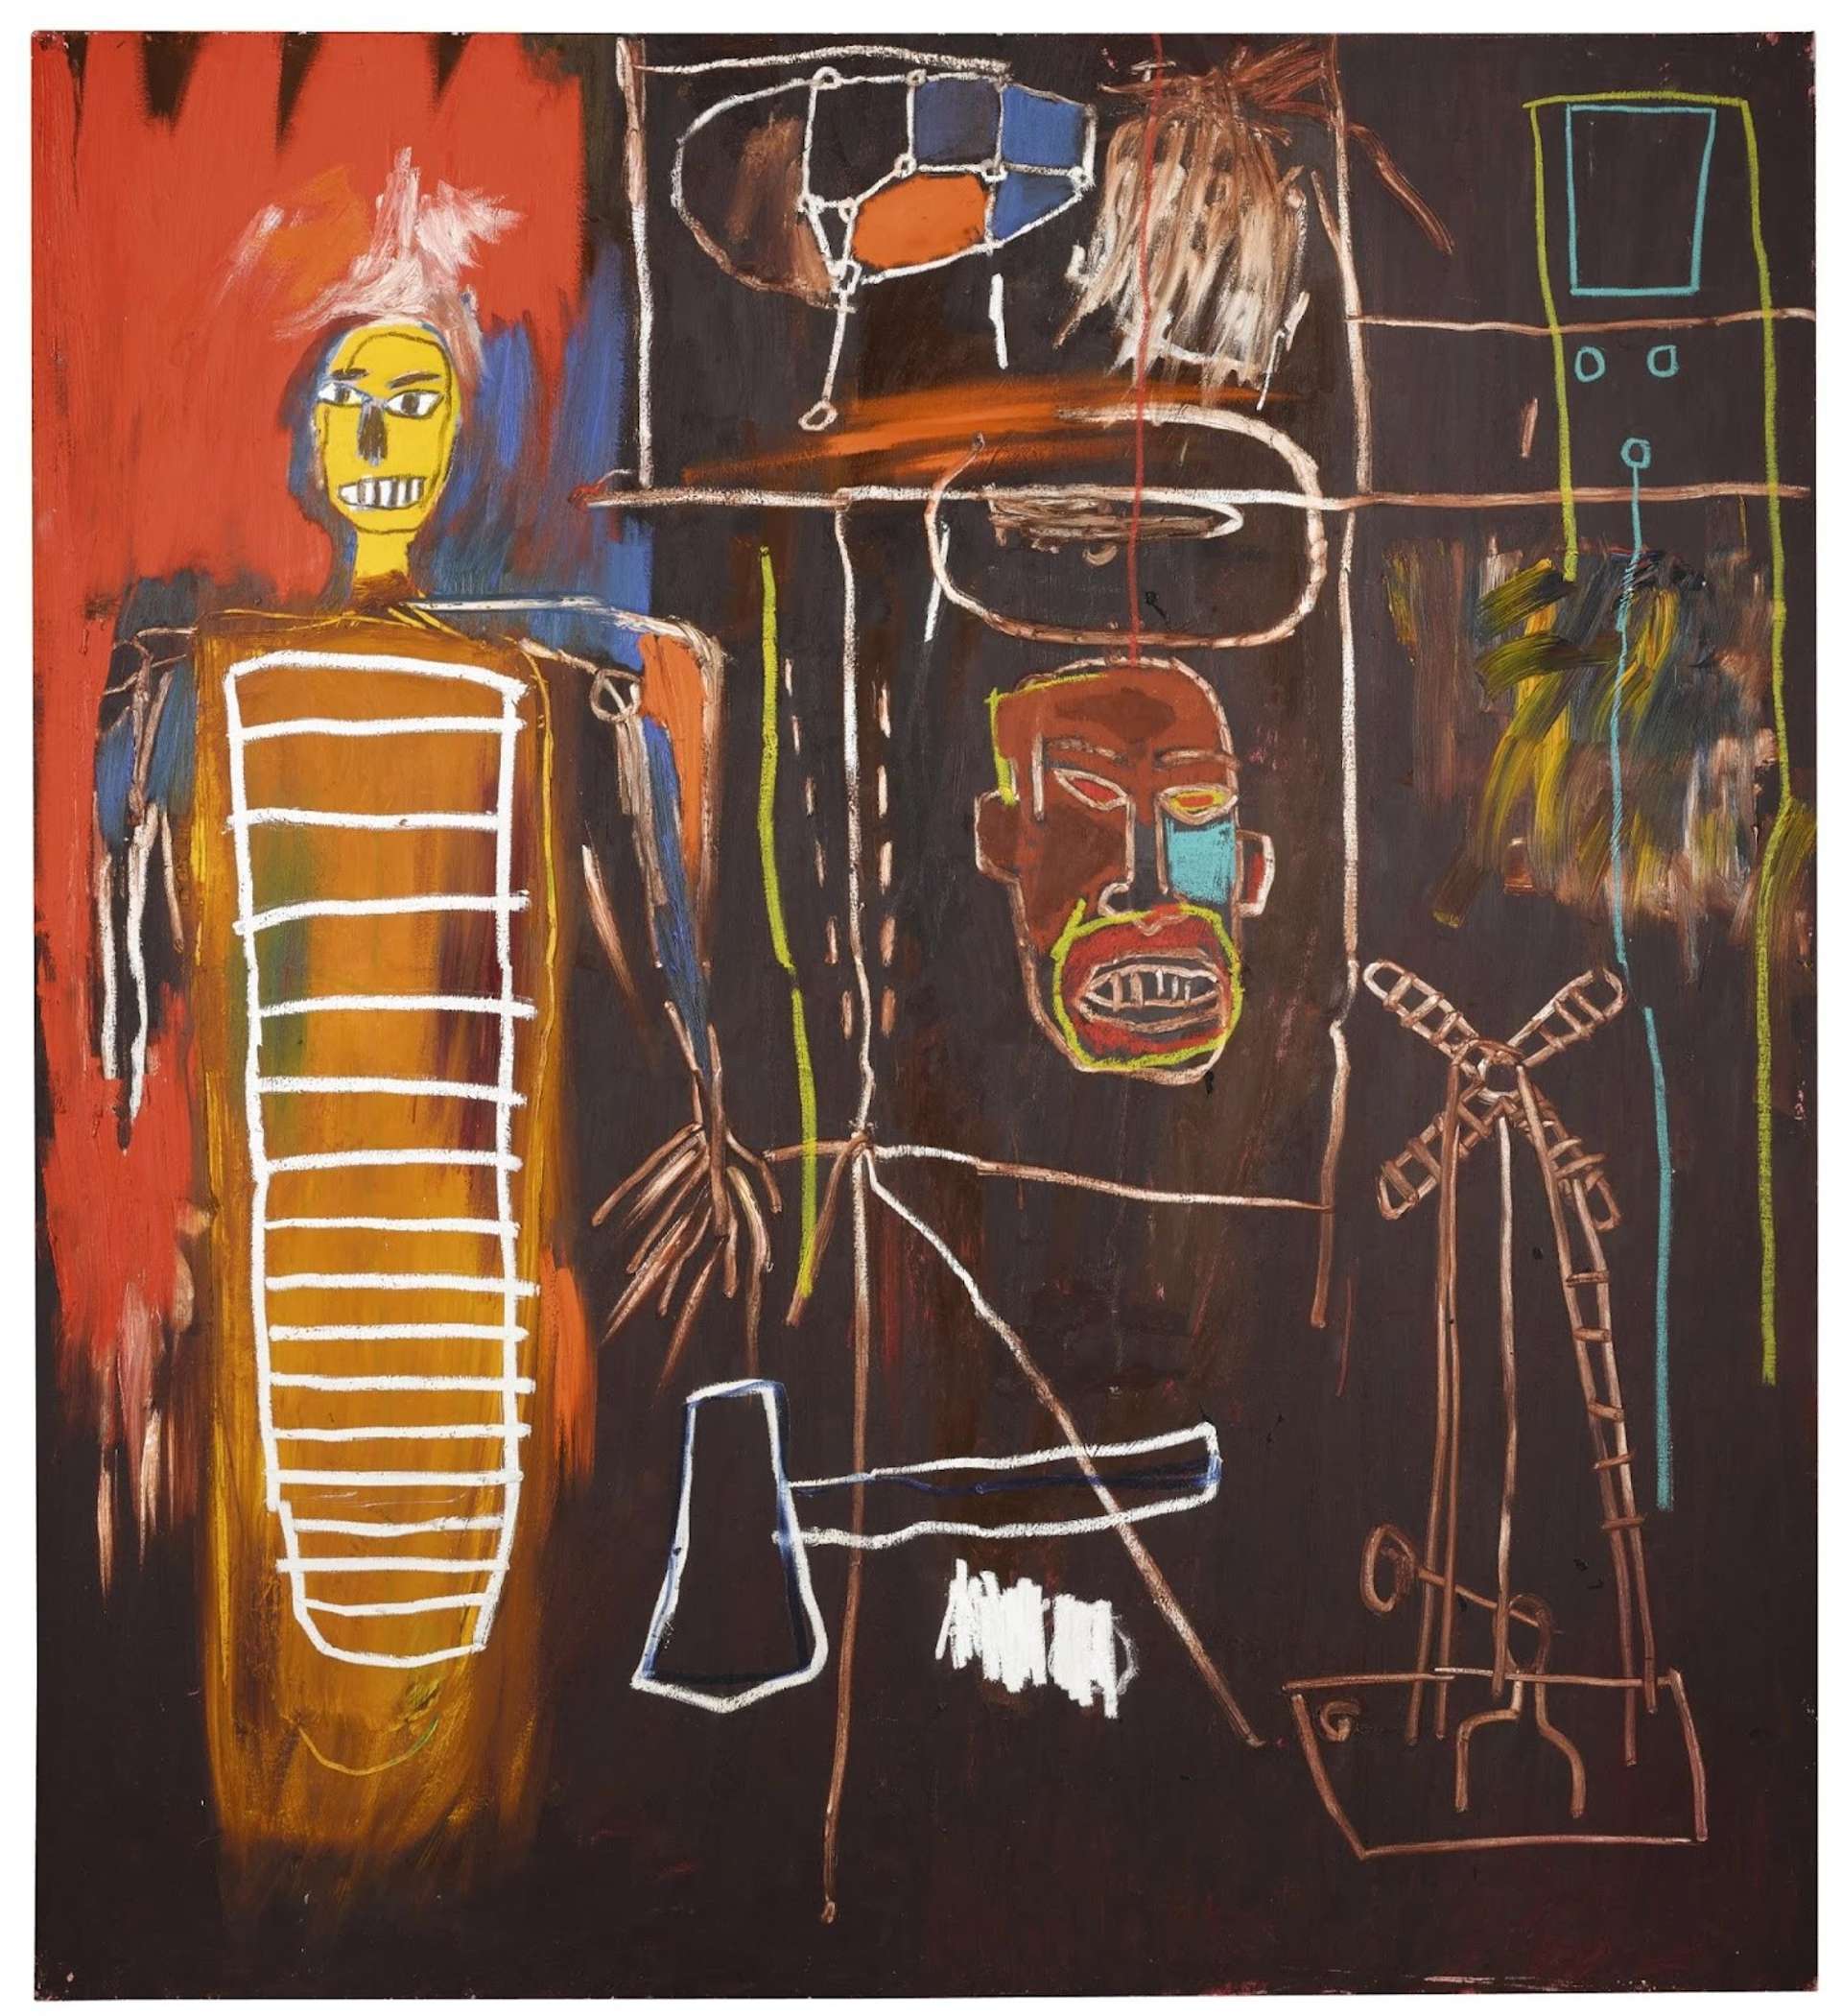 An image of the artwork Air Power by Jean-Michel Basquiat. It shows a figure to the left, with an axe sitting by its feet. In the centre of the composition, there is a disembodied mask-like head. The colour palette is largely promised of browns, reds, yellows and blues